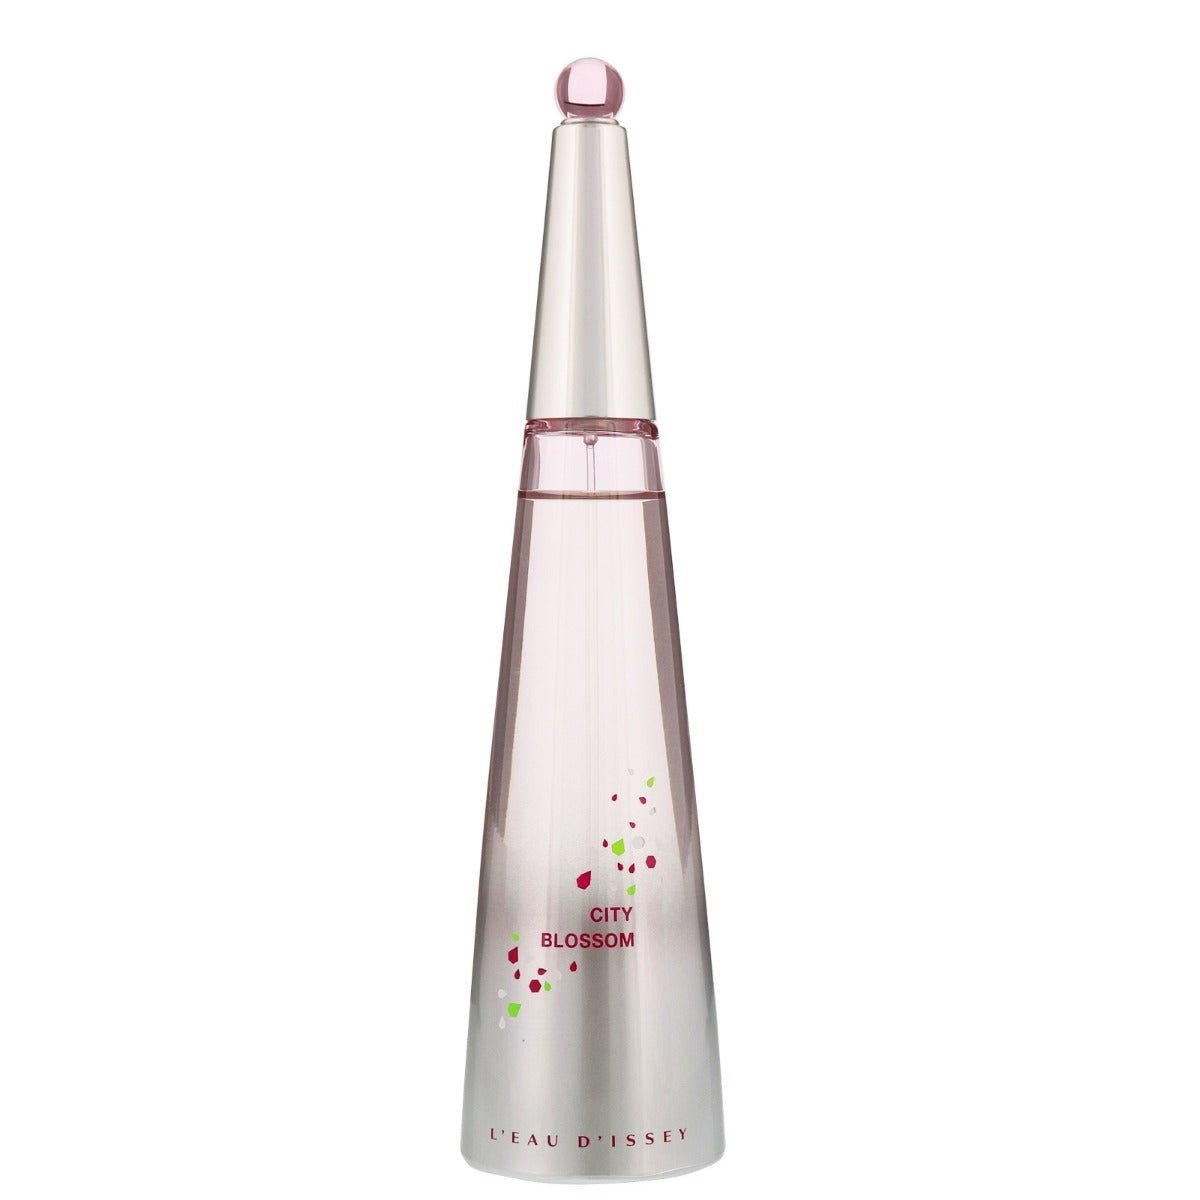 Issey Miyake L’Eau d’Issey City Blossom Limited Edition Edt Spray For Women 90ml - AllurebeautypkIssey Miyake L’Eau d’Issey City Blossom Limited Edition Edt Spray For Women 90ml